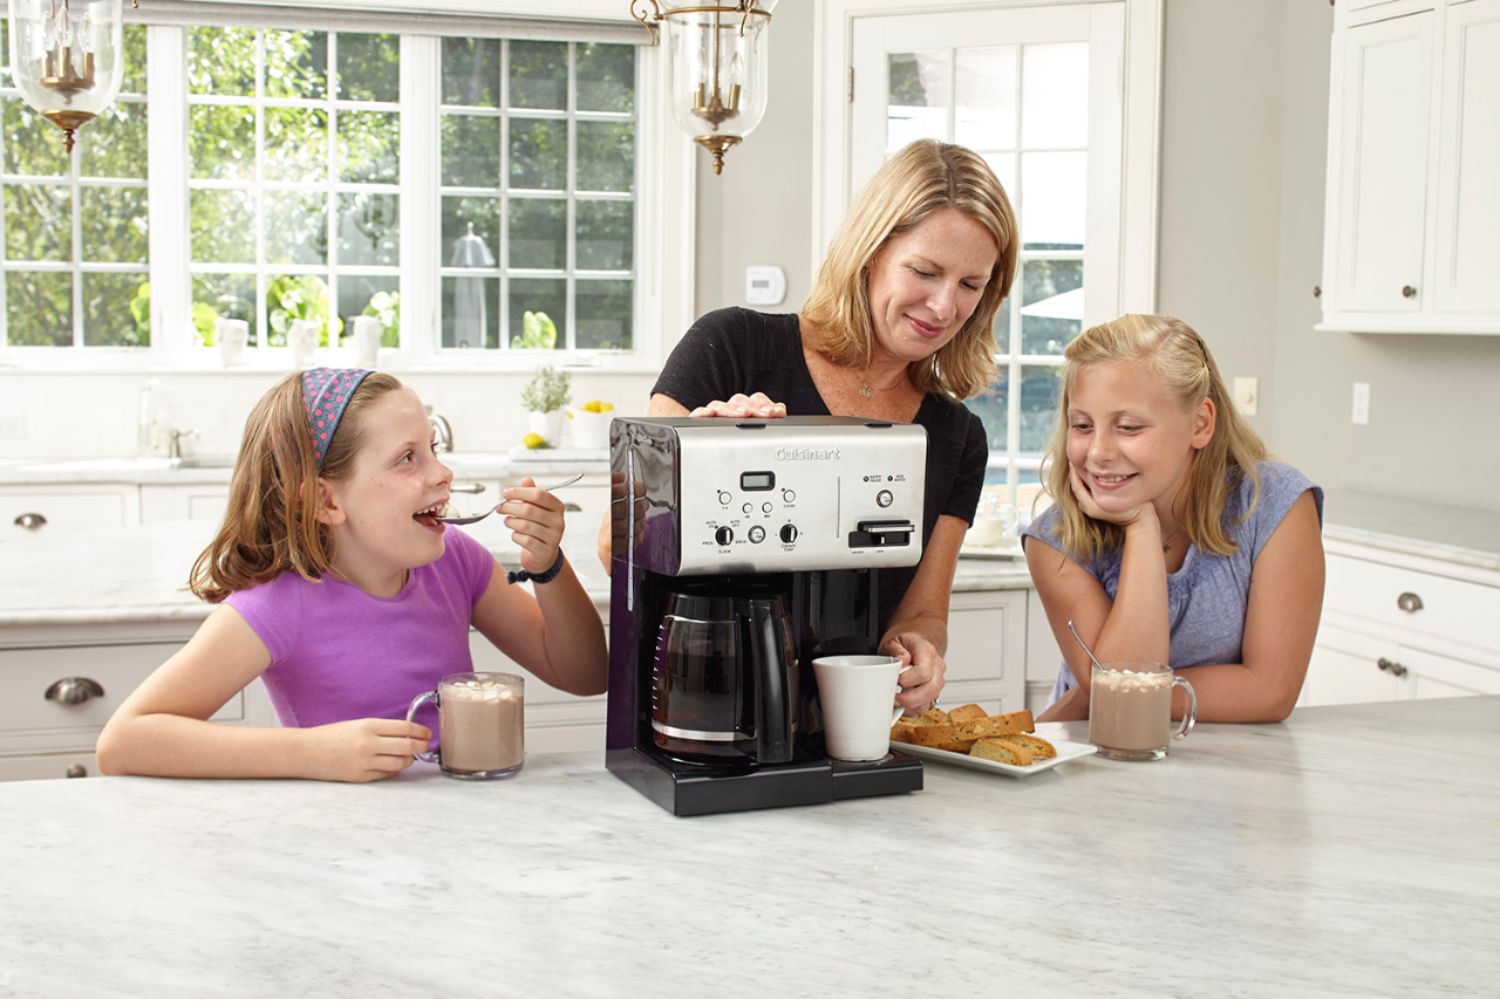 Cuisinart CHW-16 12-Cup Programmable Coffeemaker & Hot Water System New  Black